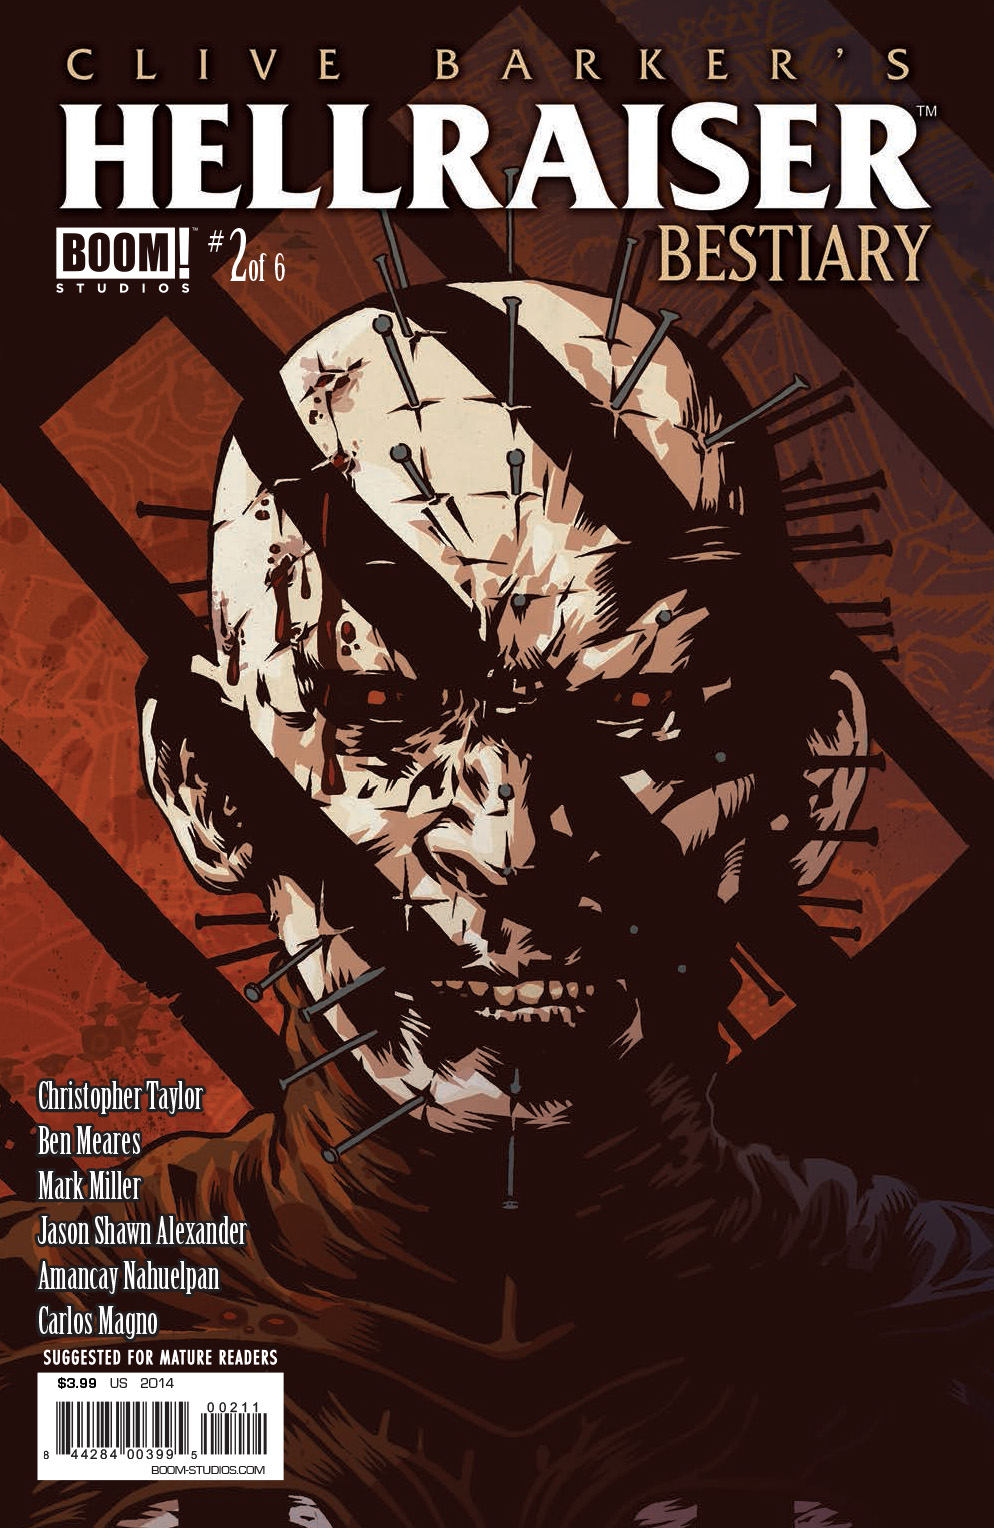 Comic Book Review] Clive Barker's Hellraiser: Bestiary #2 is Disturbing  to its Core! - Bloody Disgusting